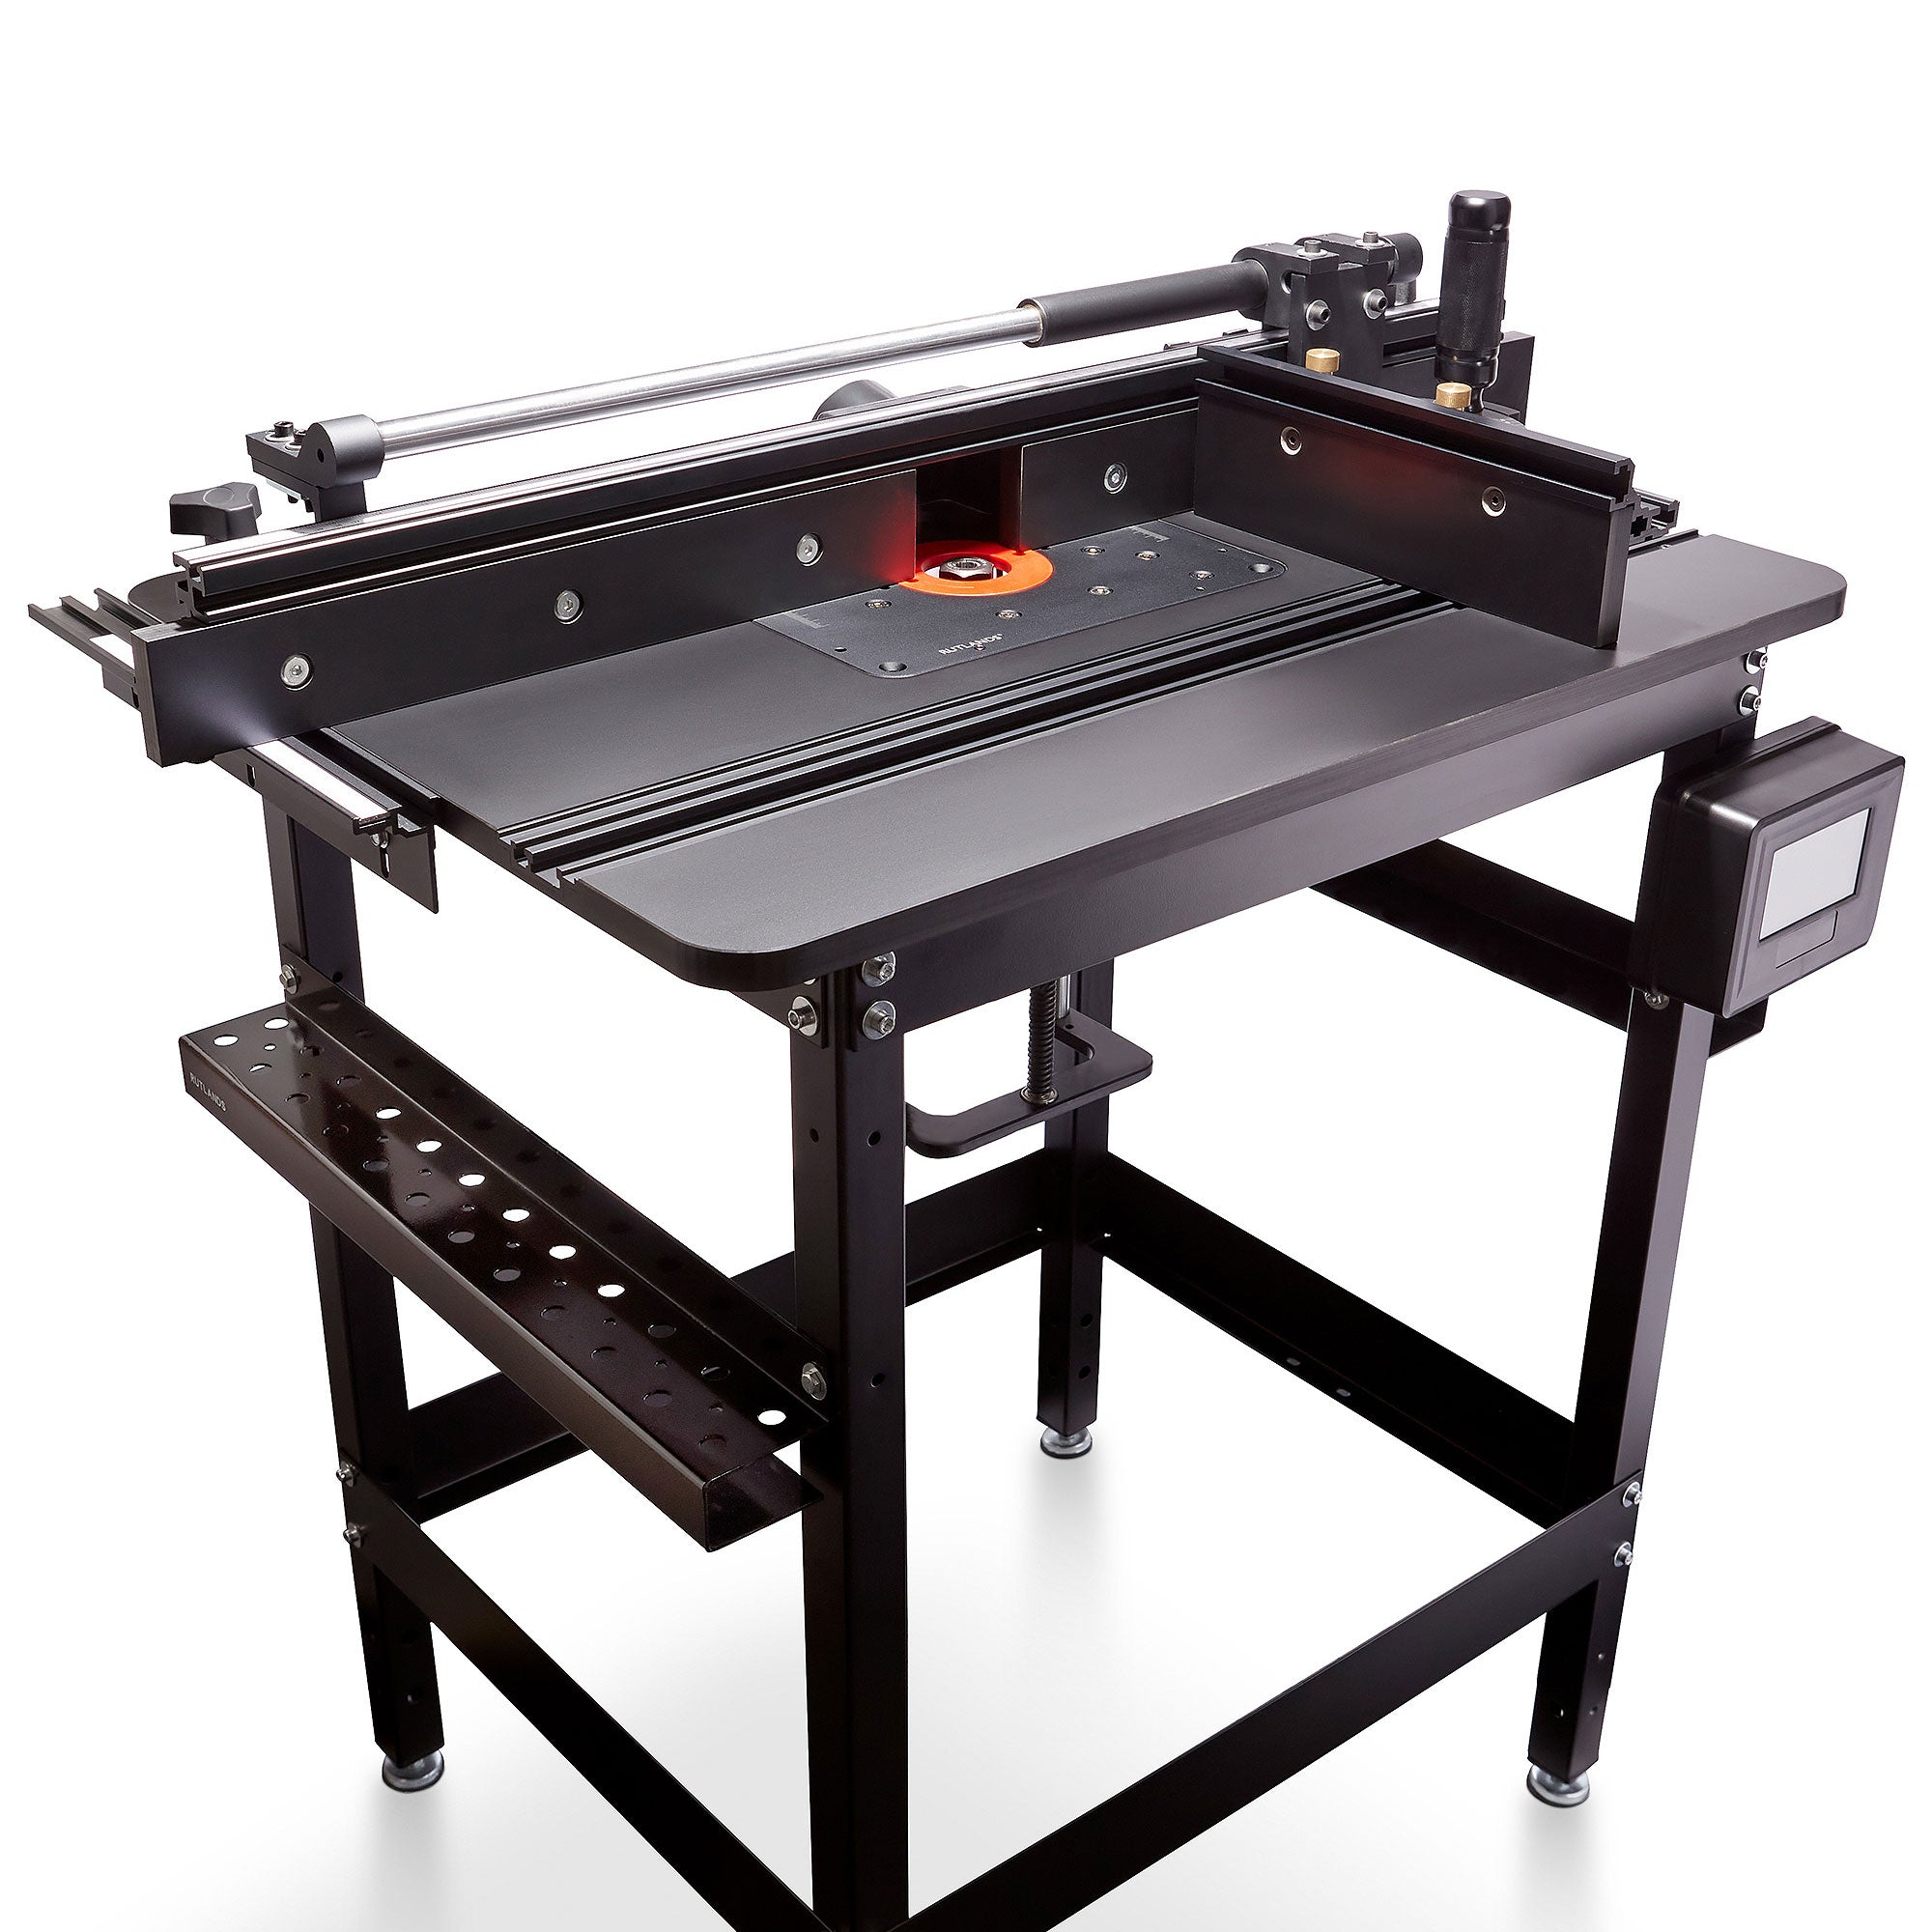 Phenolic Router Table GTS - R20 Electronic Lift and Motor